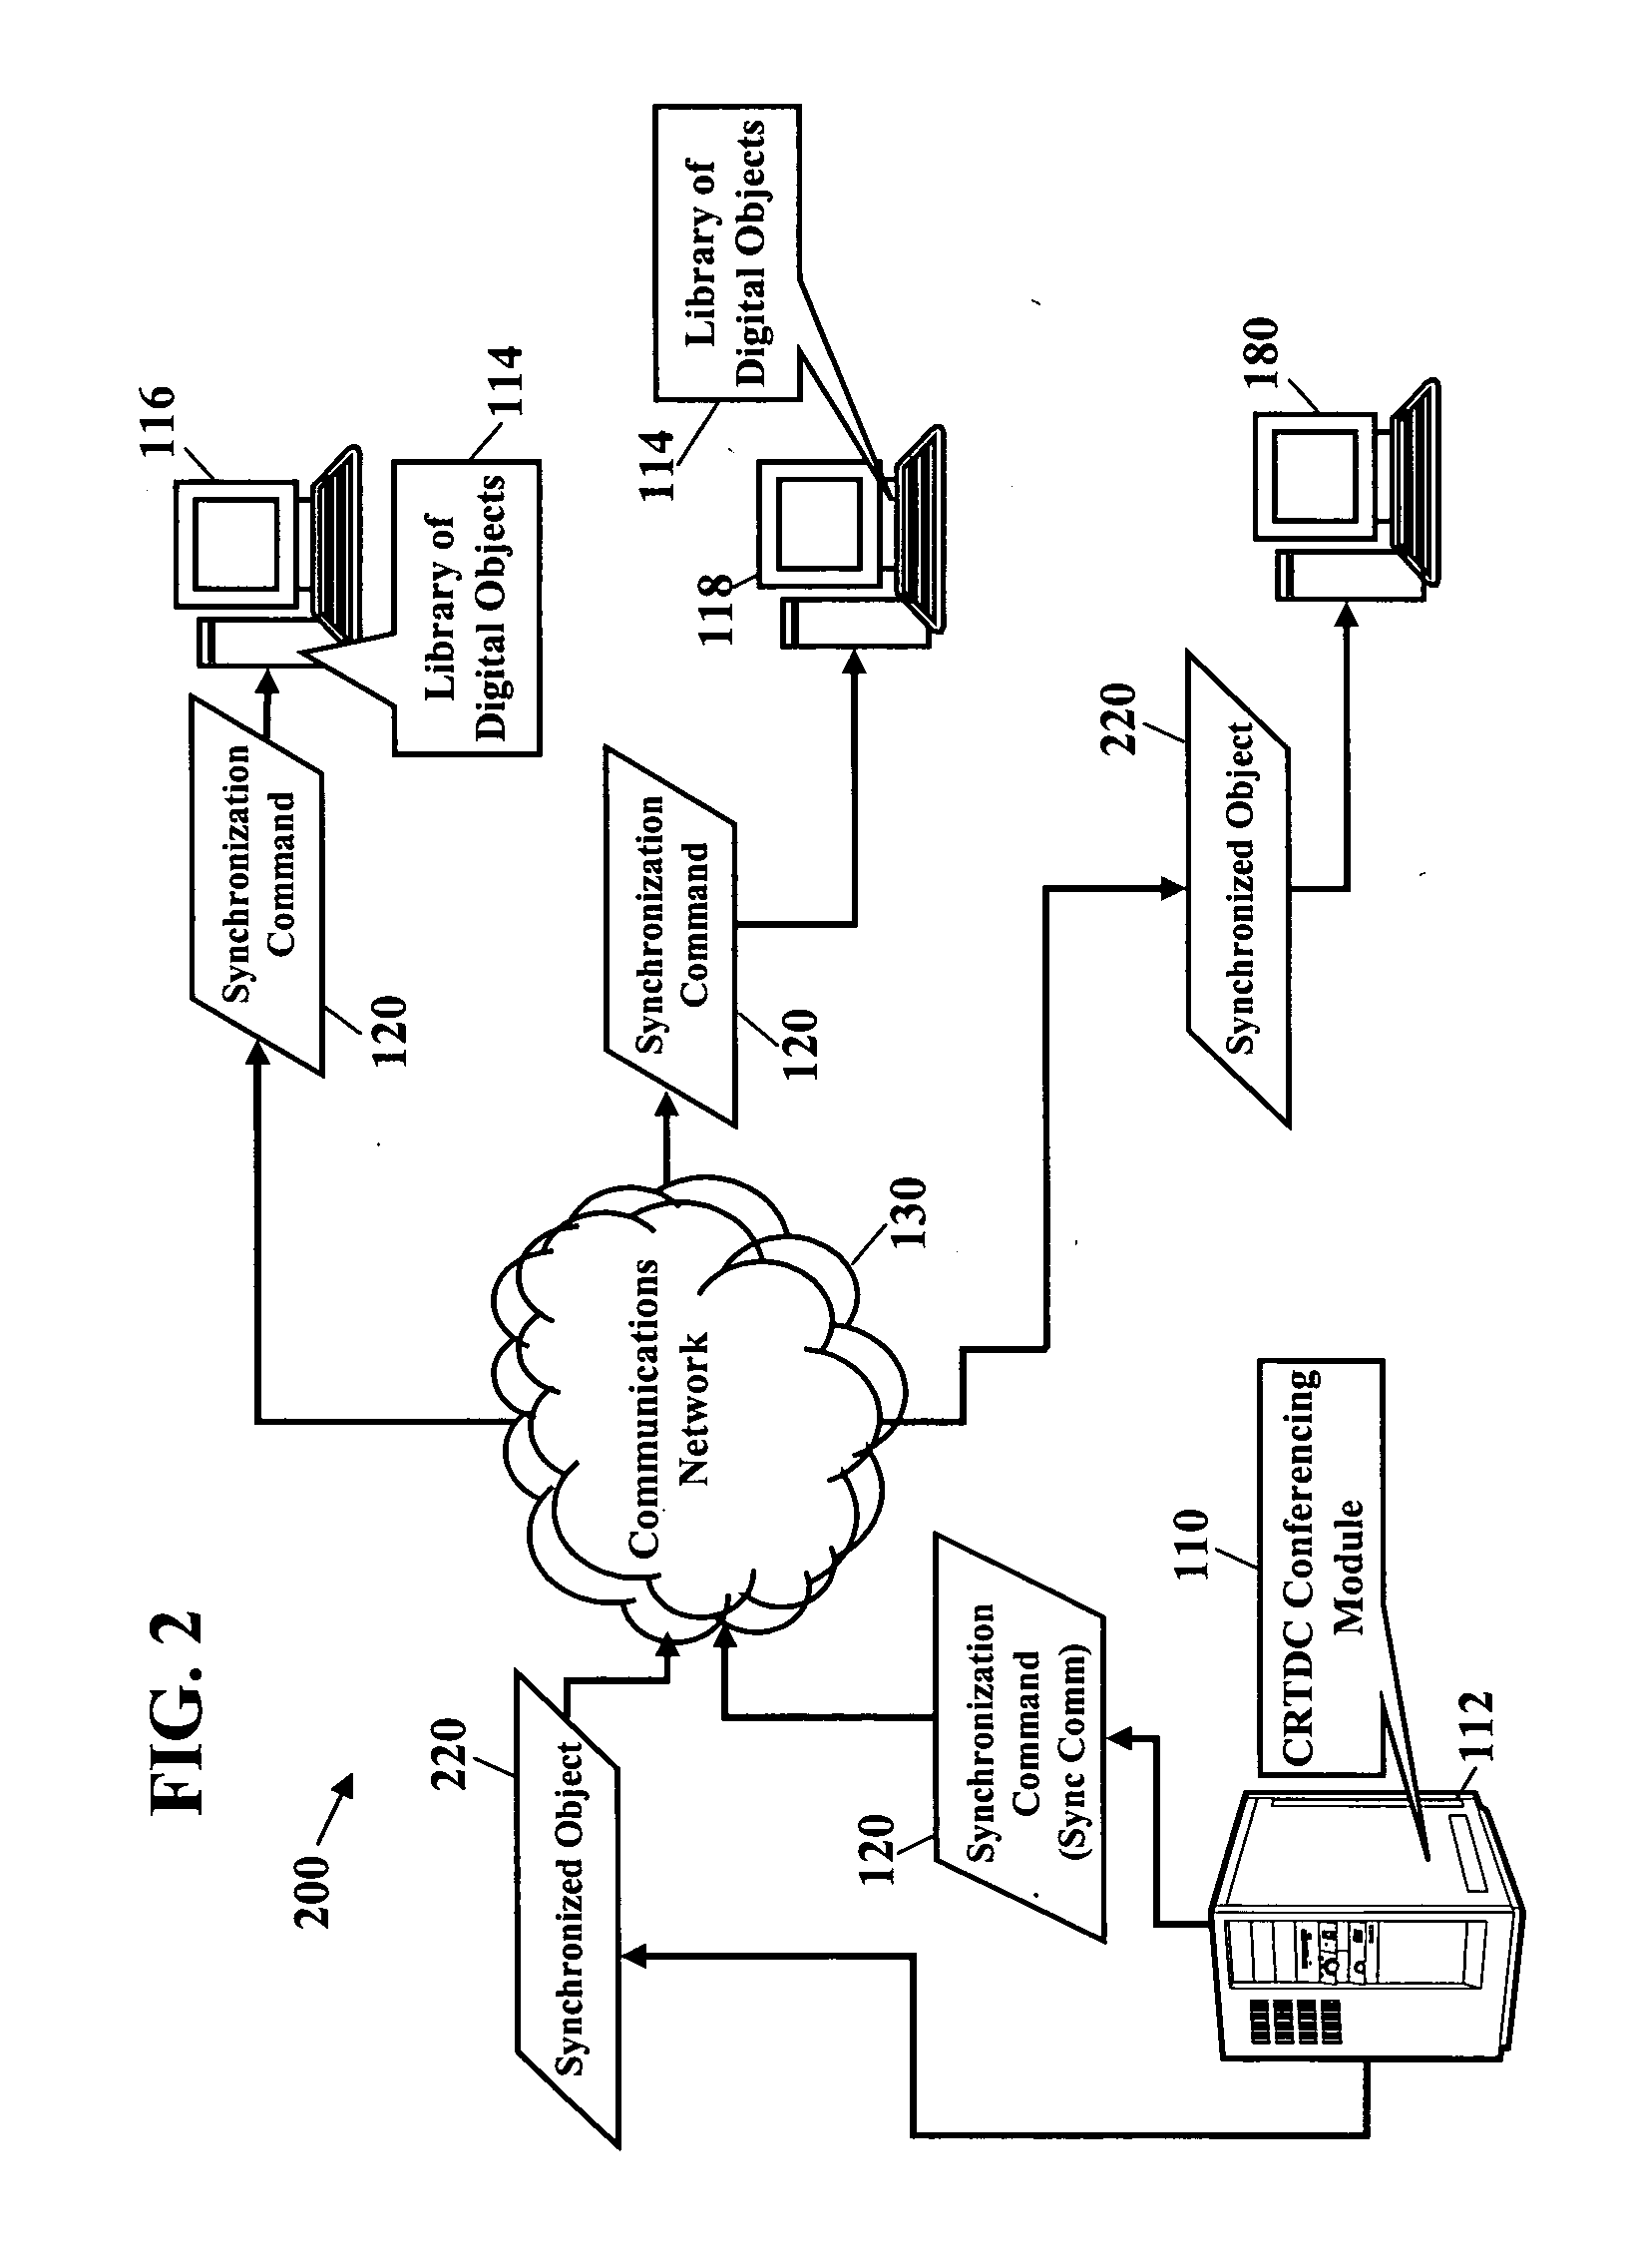 Network conferencing using method for concurrent real time broadcast and distributed computing and/or distributed objects